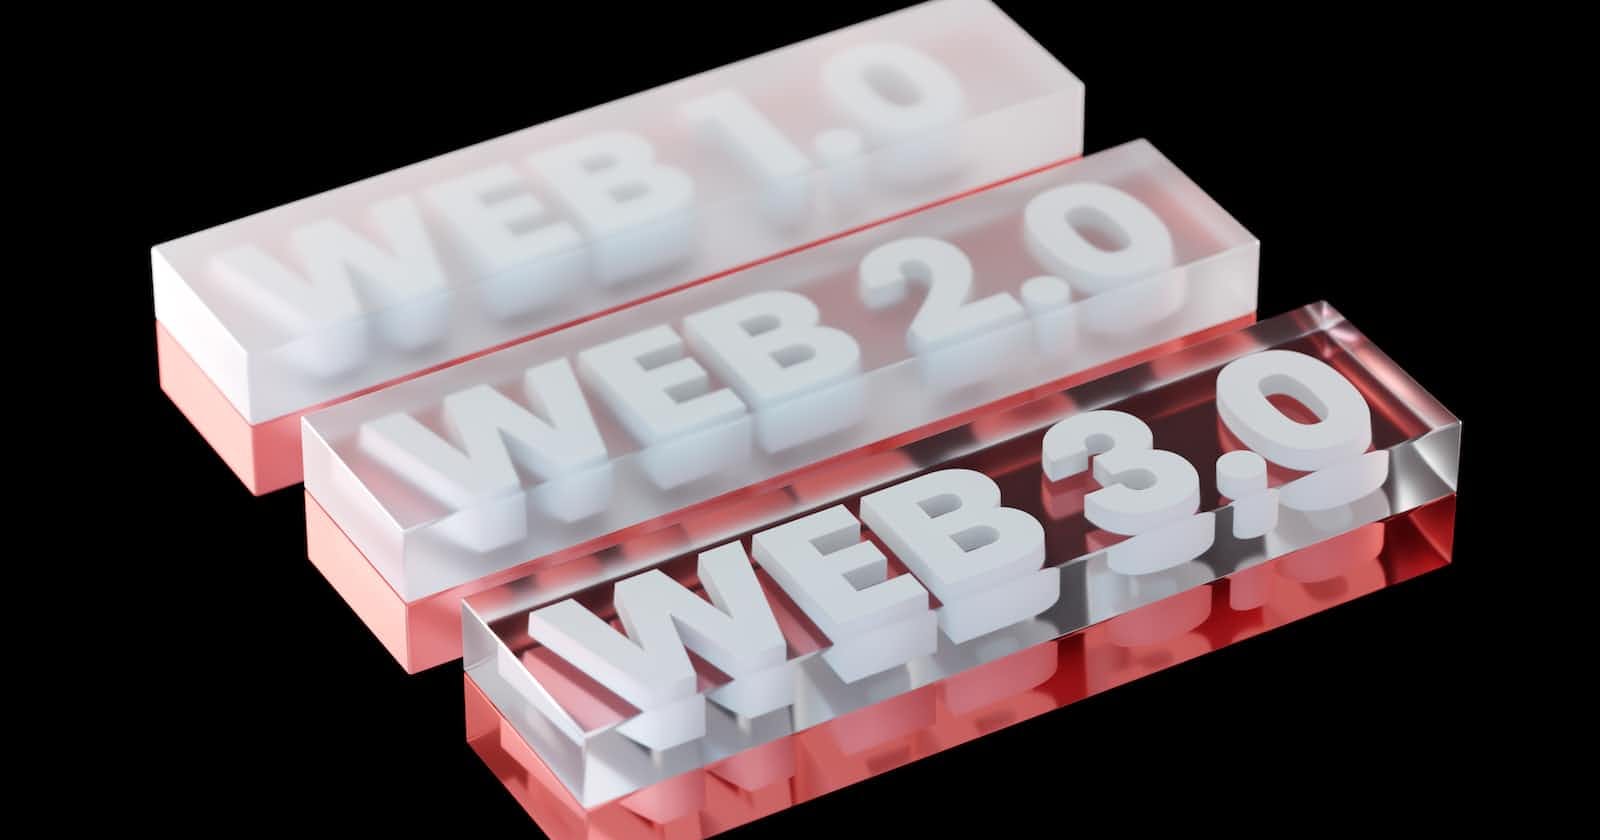 What the heck is this web3.0?